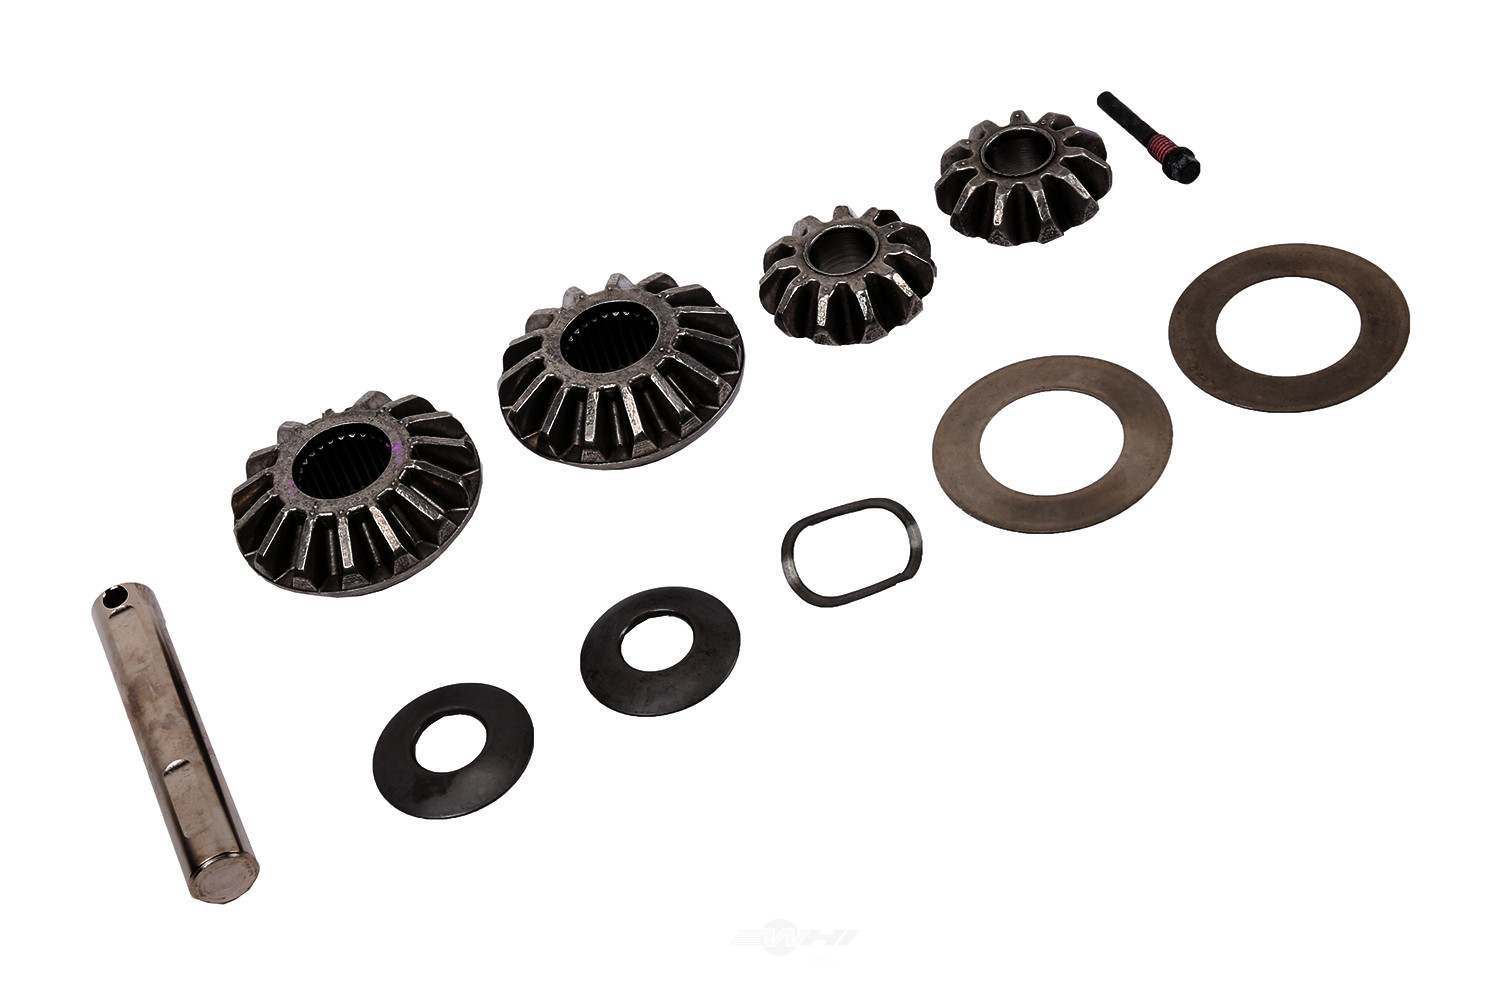 GM GENUINE PARTS - Differential Carrier Gear Kit - GMP 92246998